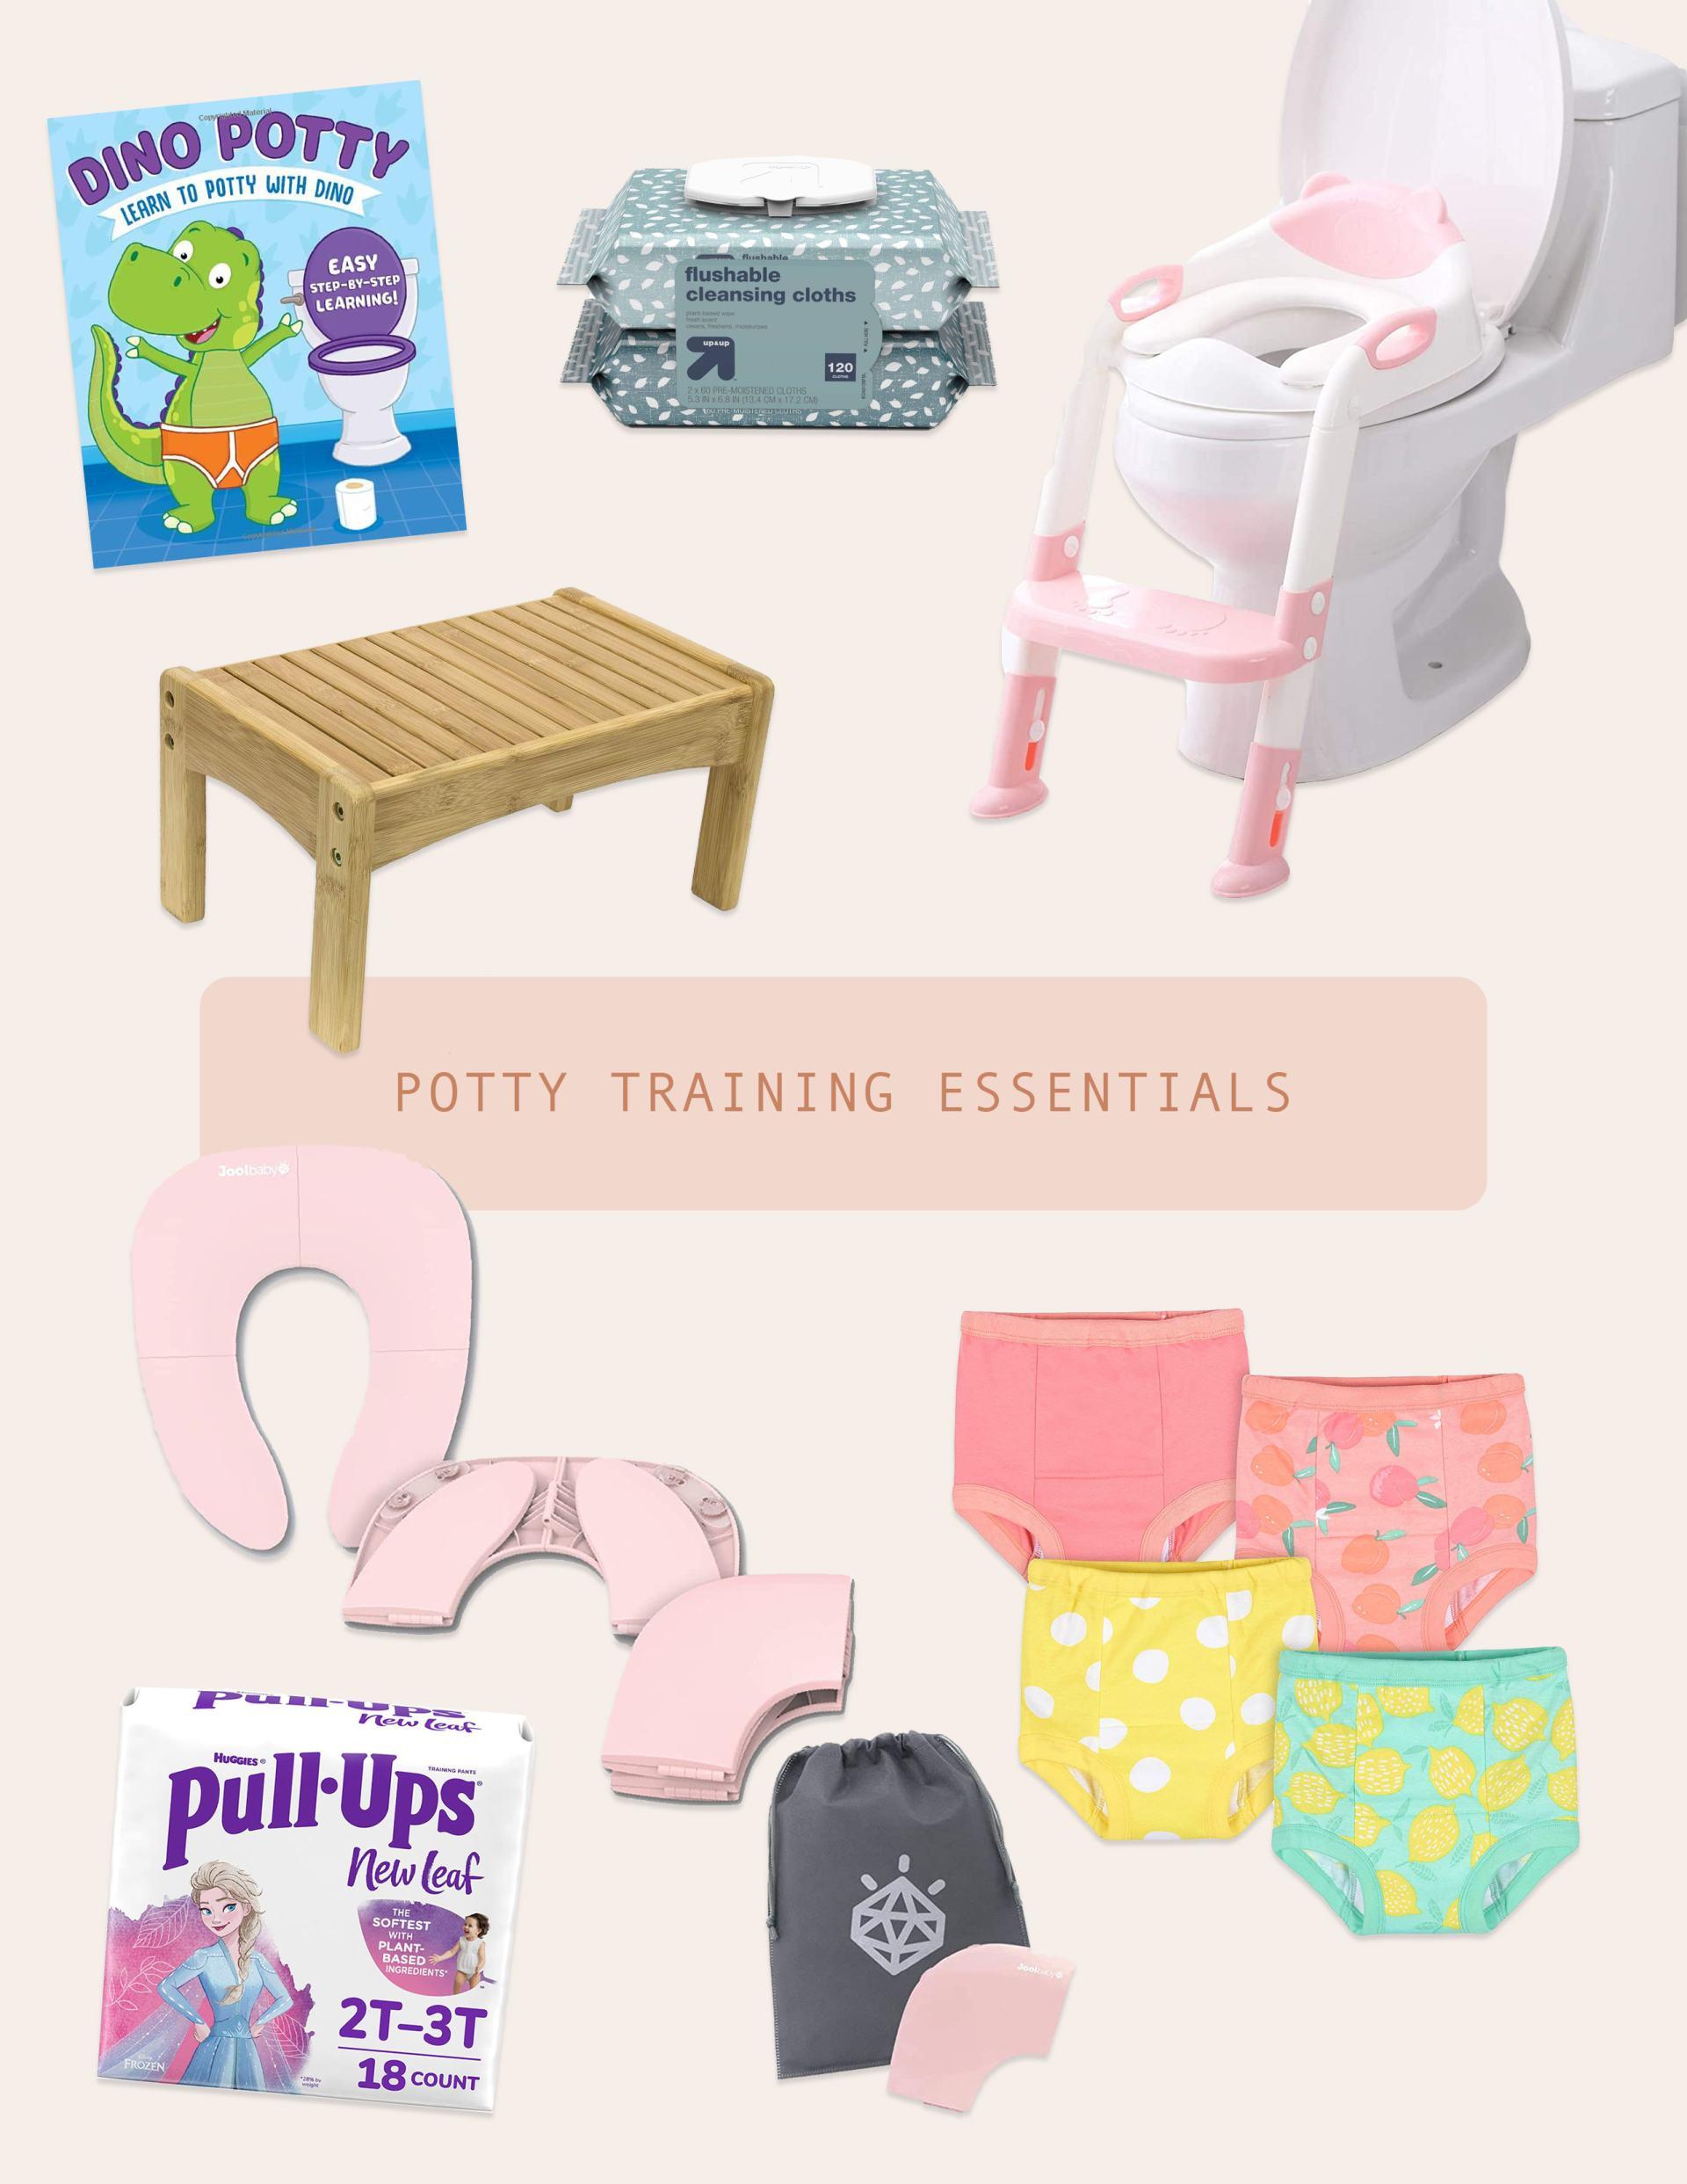 7 Expert Tips to Potty Train Kids With Special Needs - MeBe